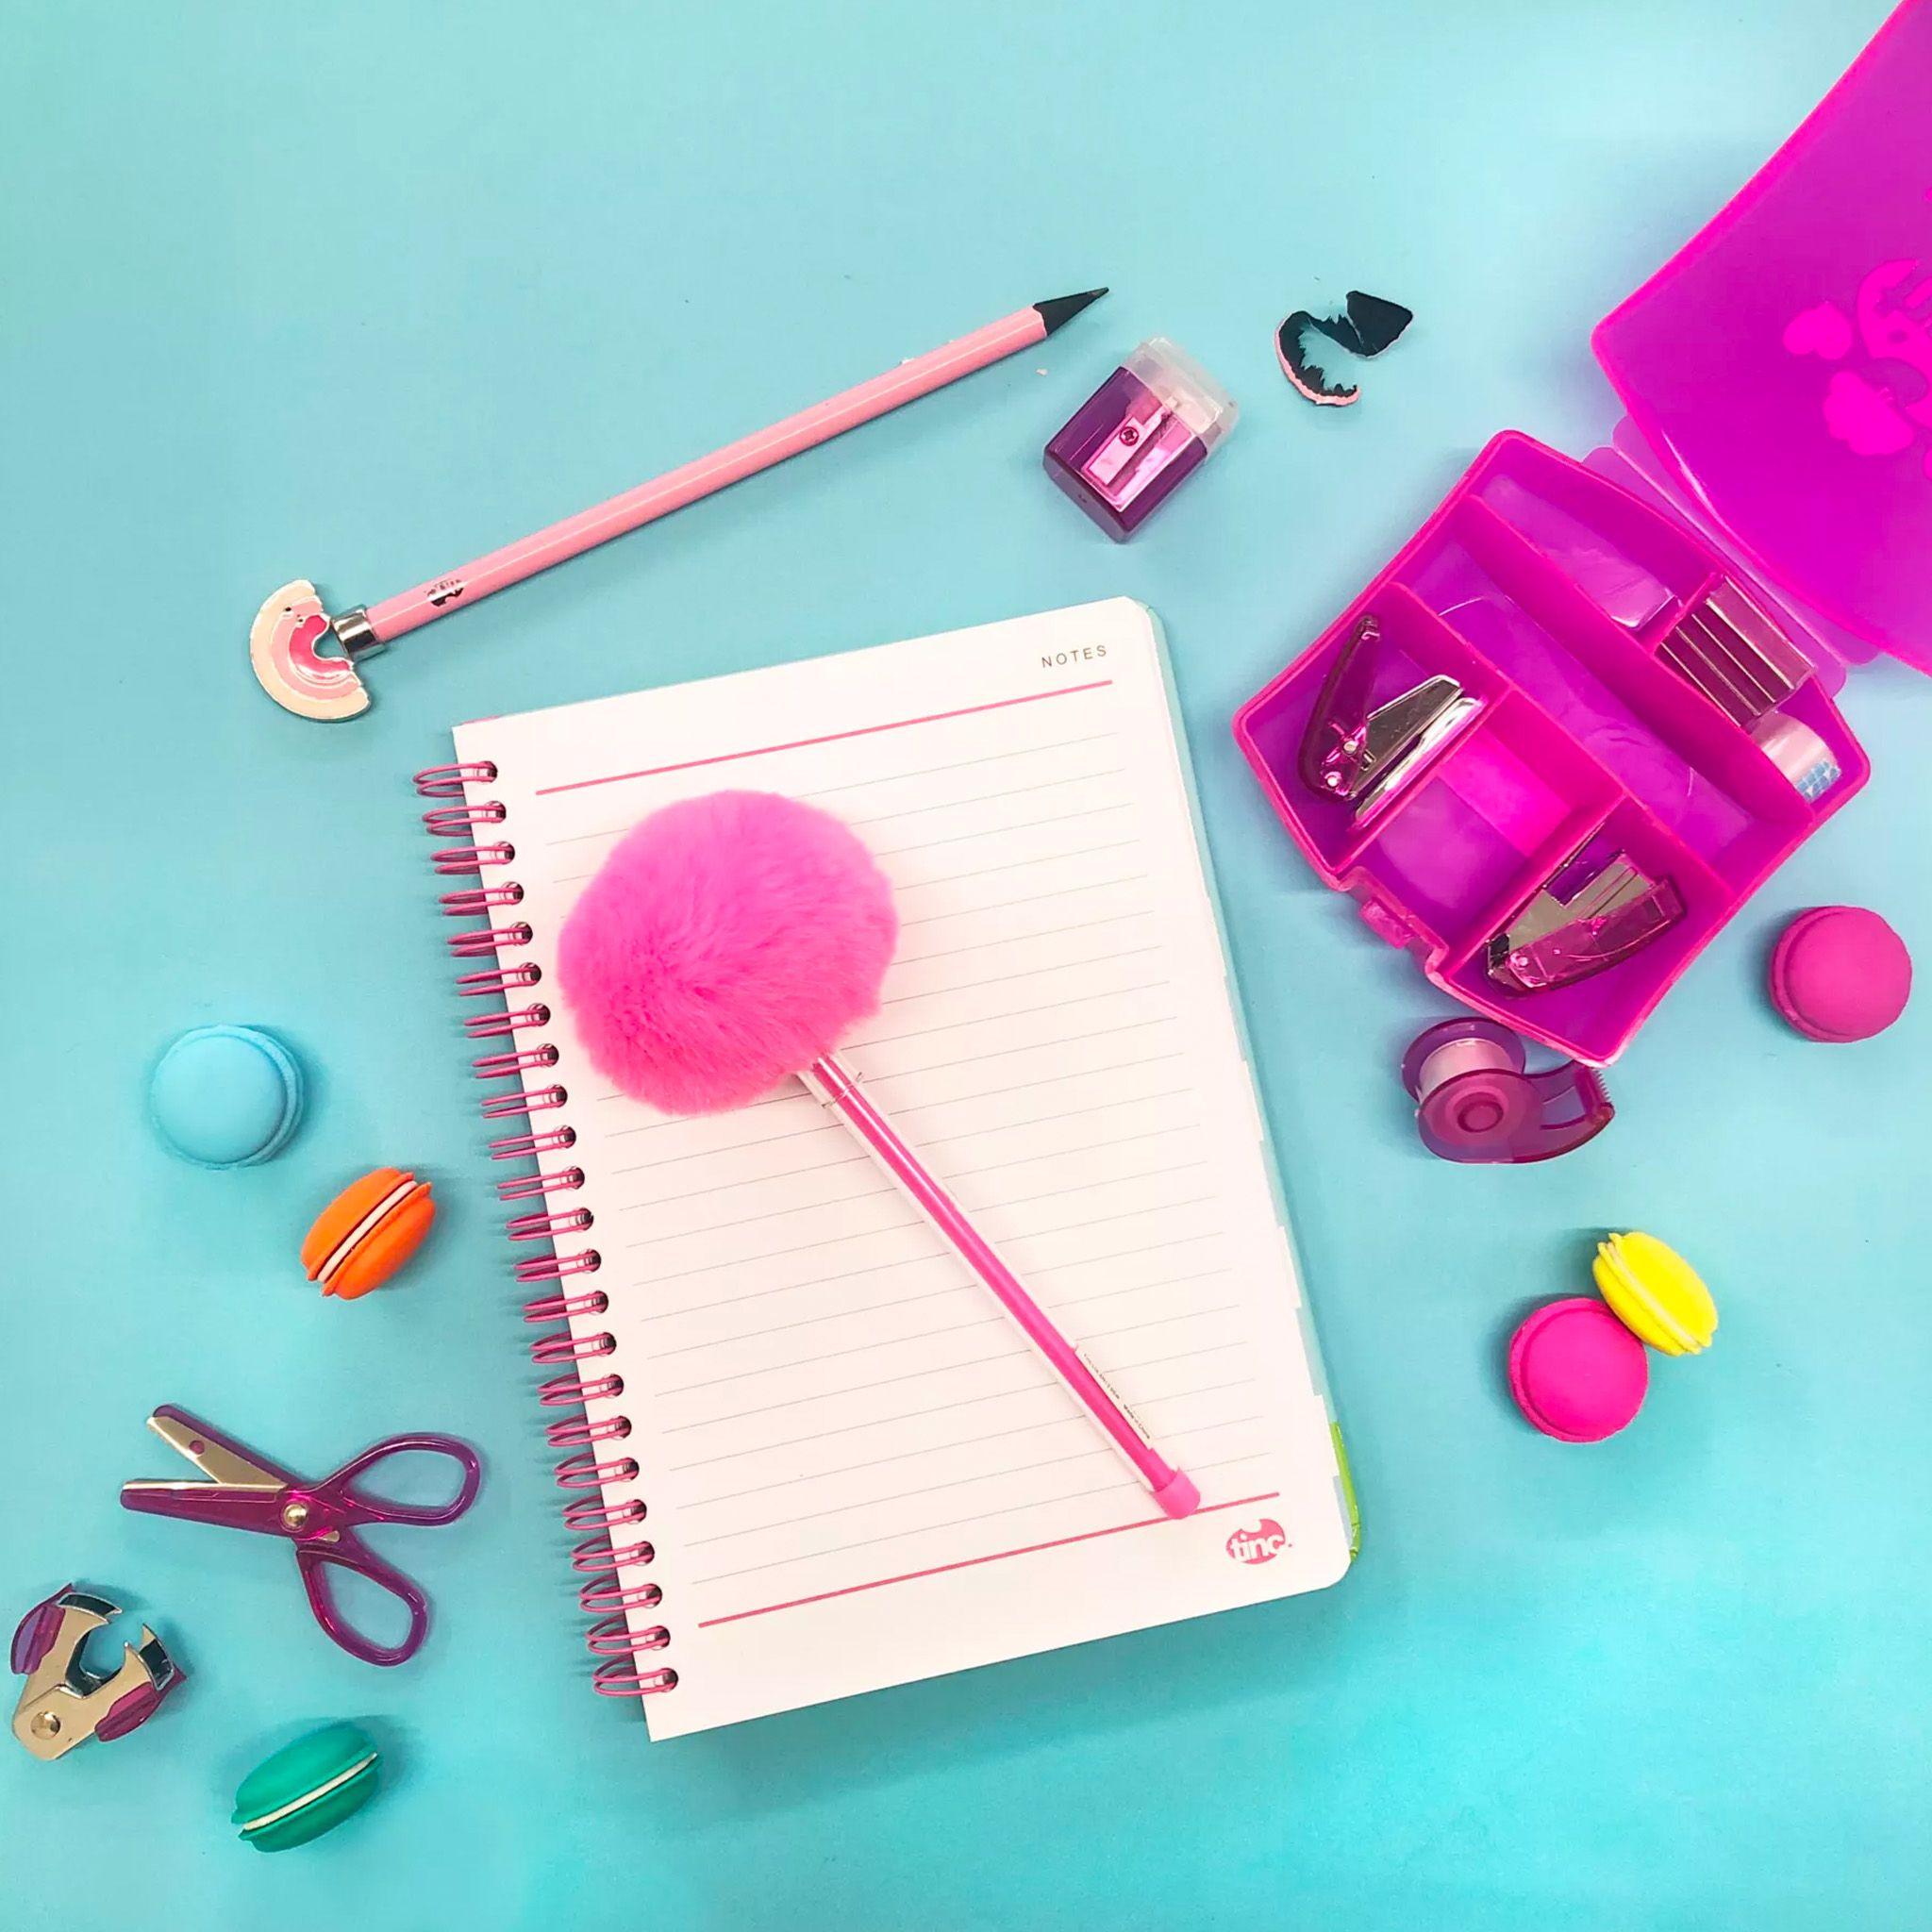 Stationery A-Z: Back to School Supplies!